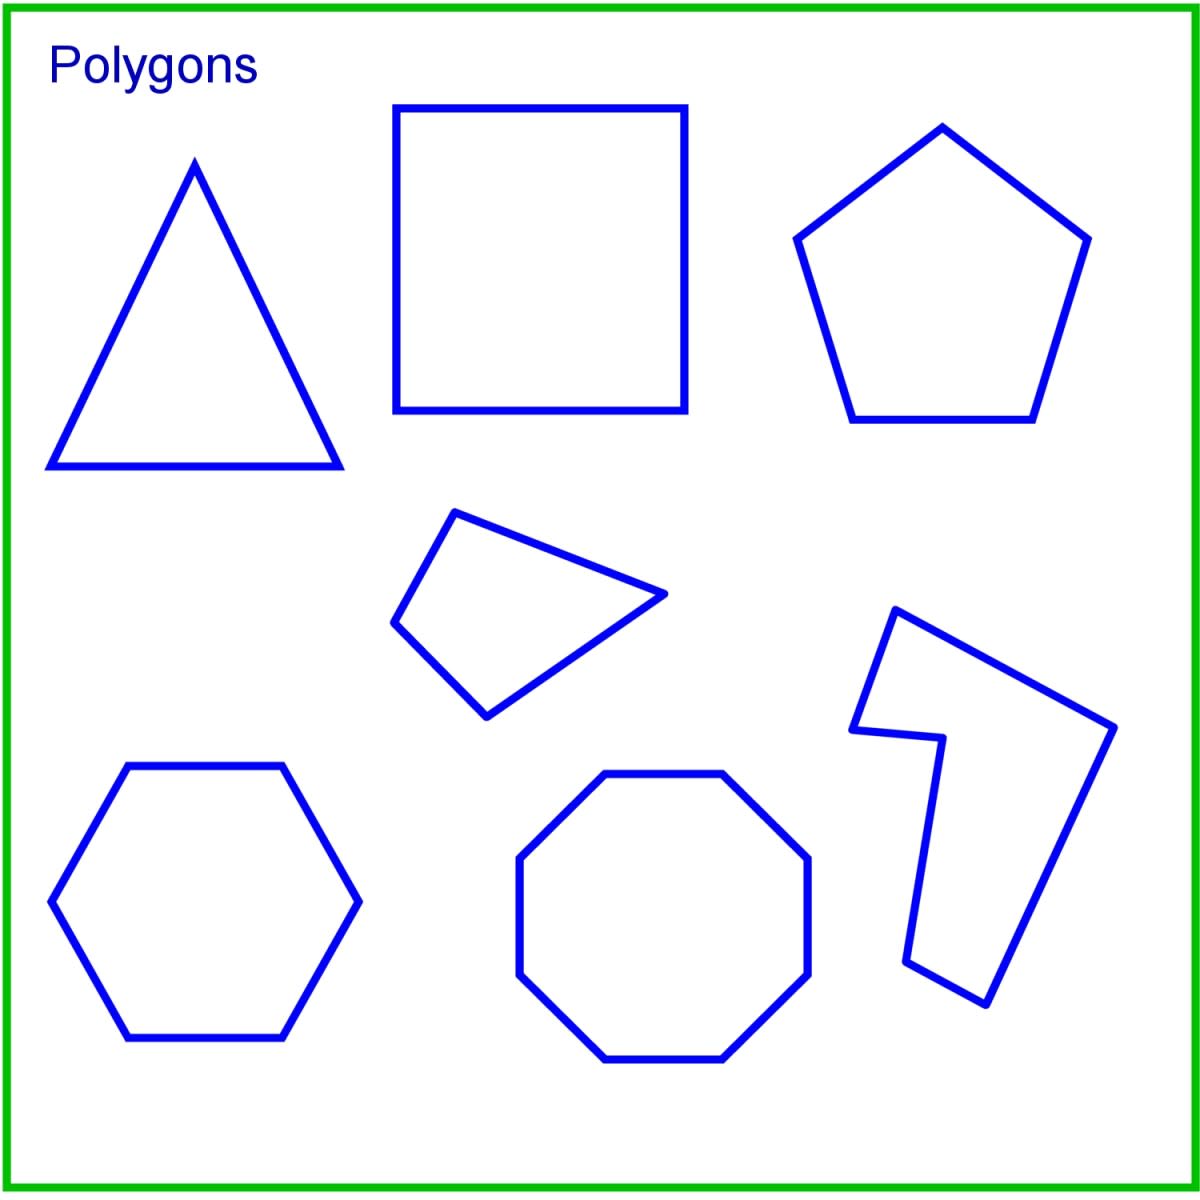 Polygons with different numbers of sides. Regular polygons have sides the same length.